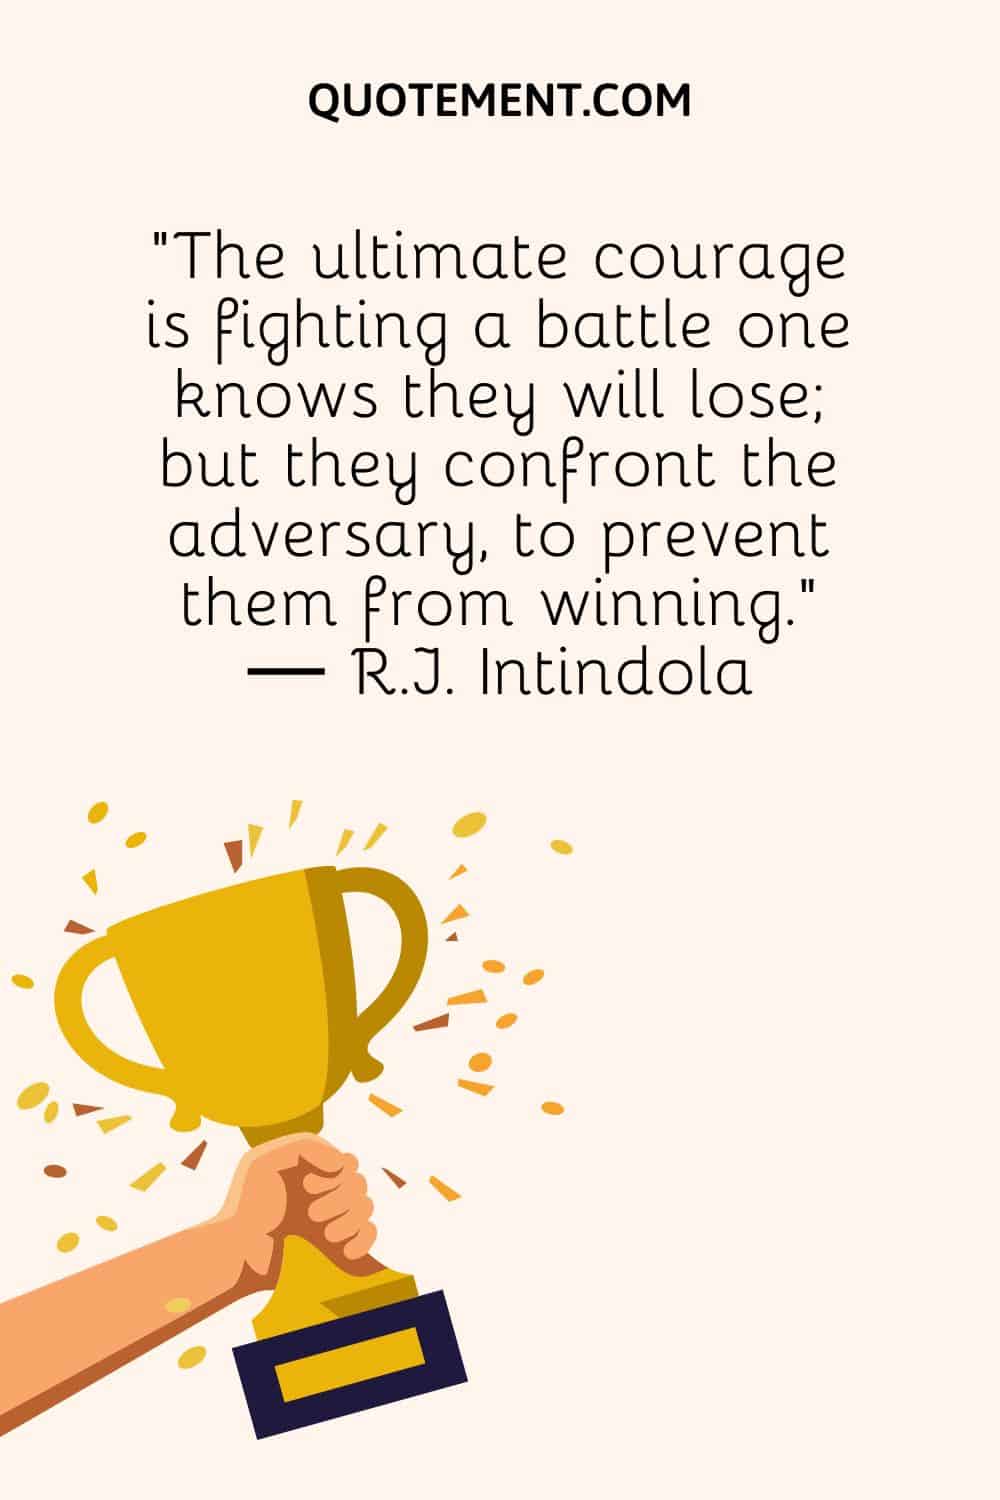 “The ultimate courage is fighting a battle one knows they will lose; but they confront the adversary, to prevent them from winning.” ― R.J. Intindola